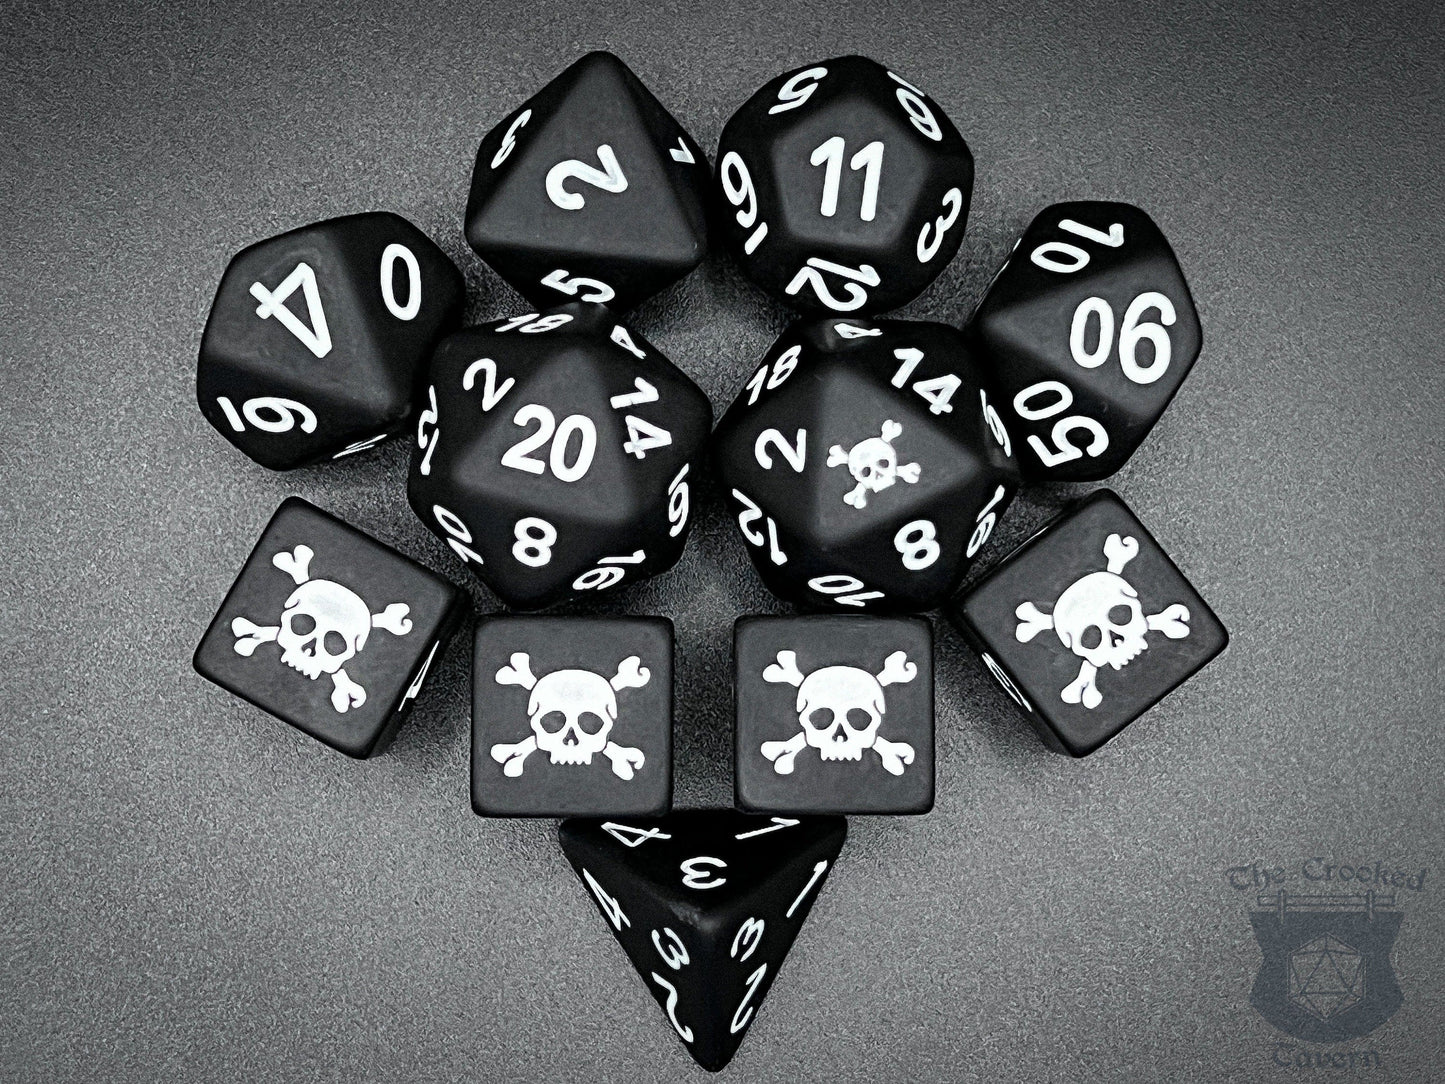 The Crooked Tavern Black Flag Exclusive 11 Piece DnD Dice Set | Pirate Themed, Matte Frosted Texture